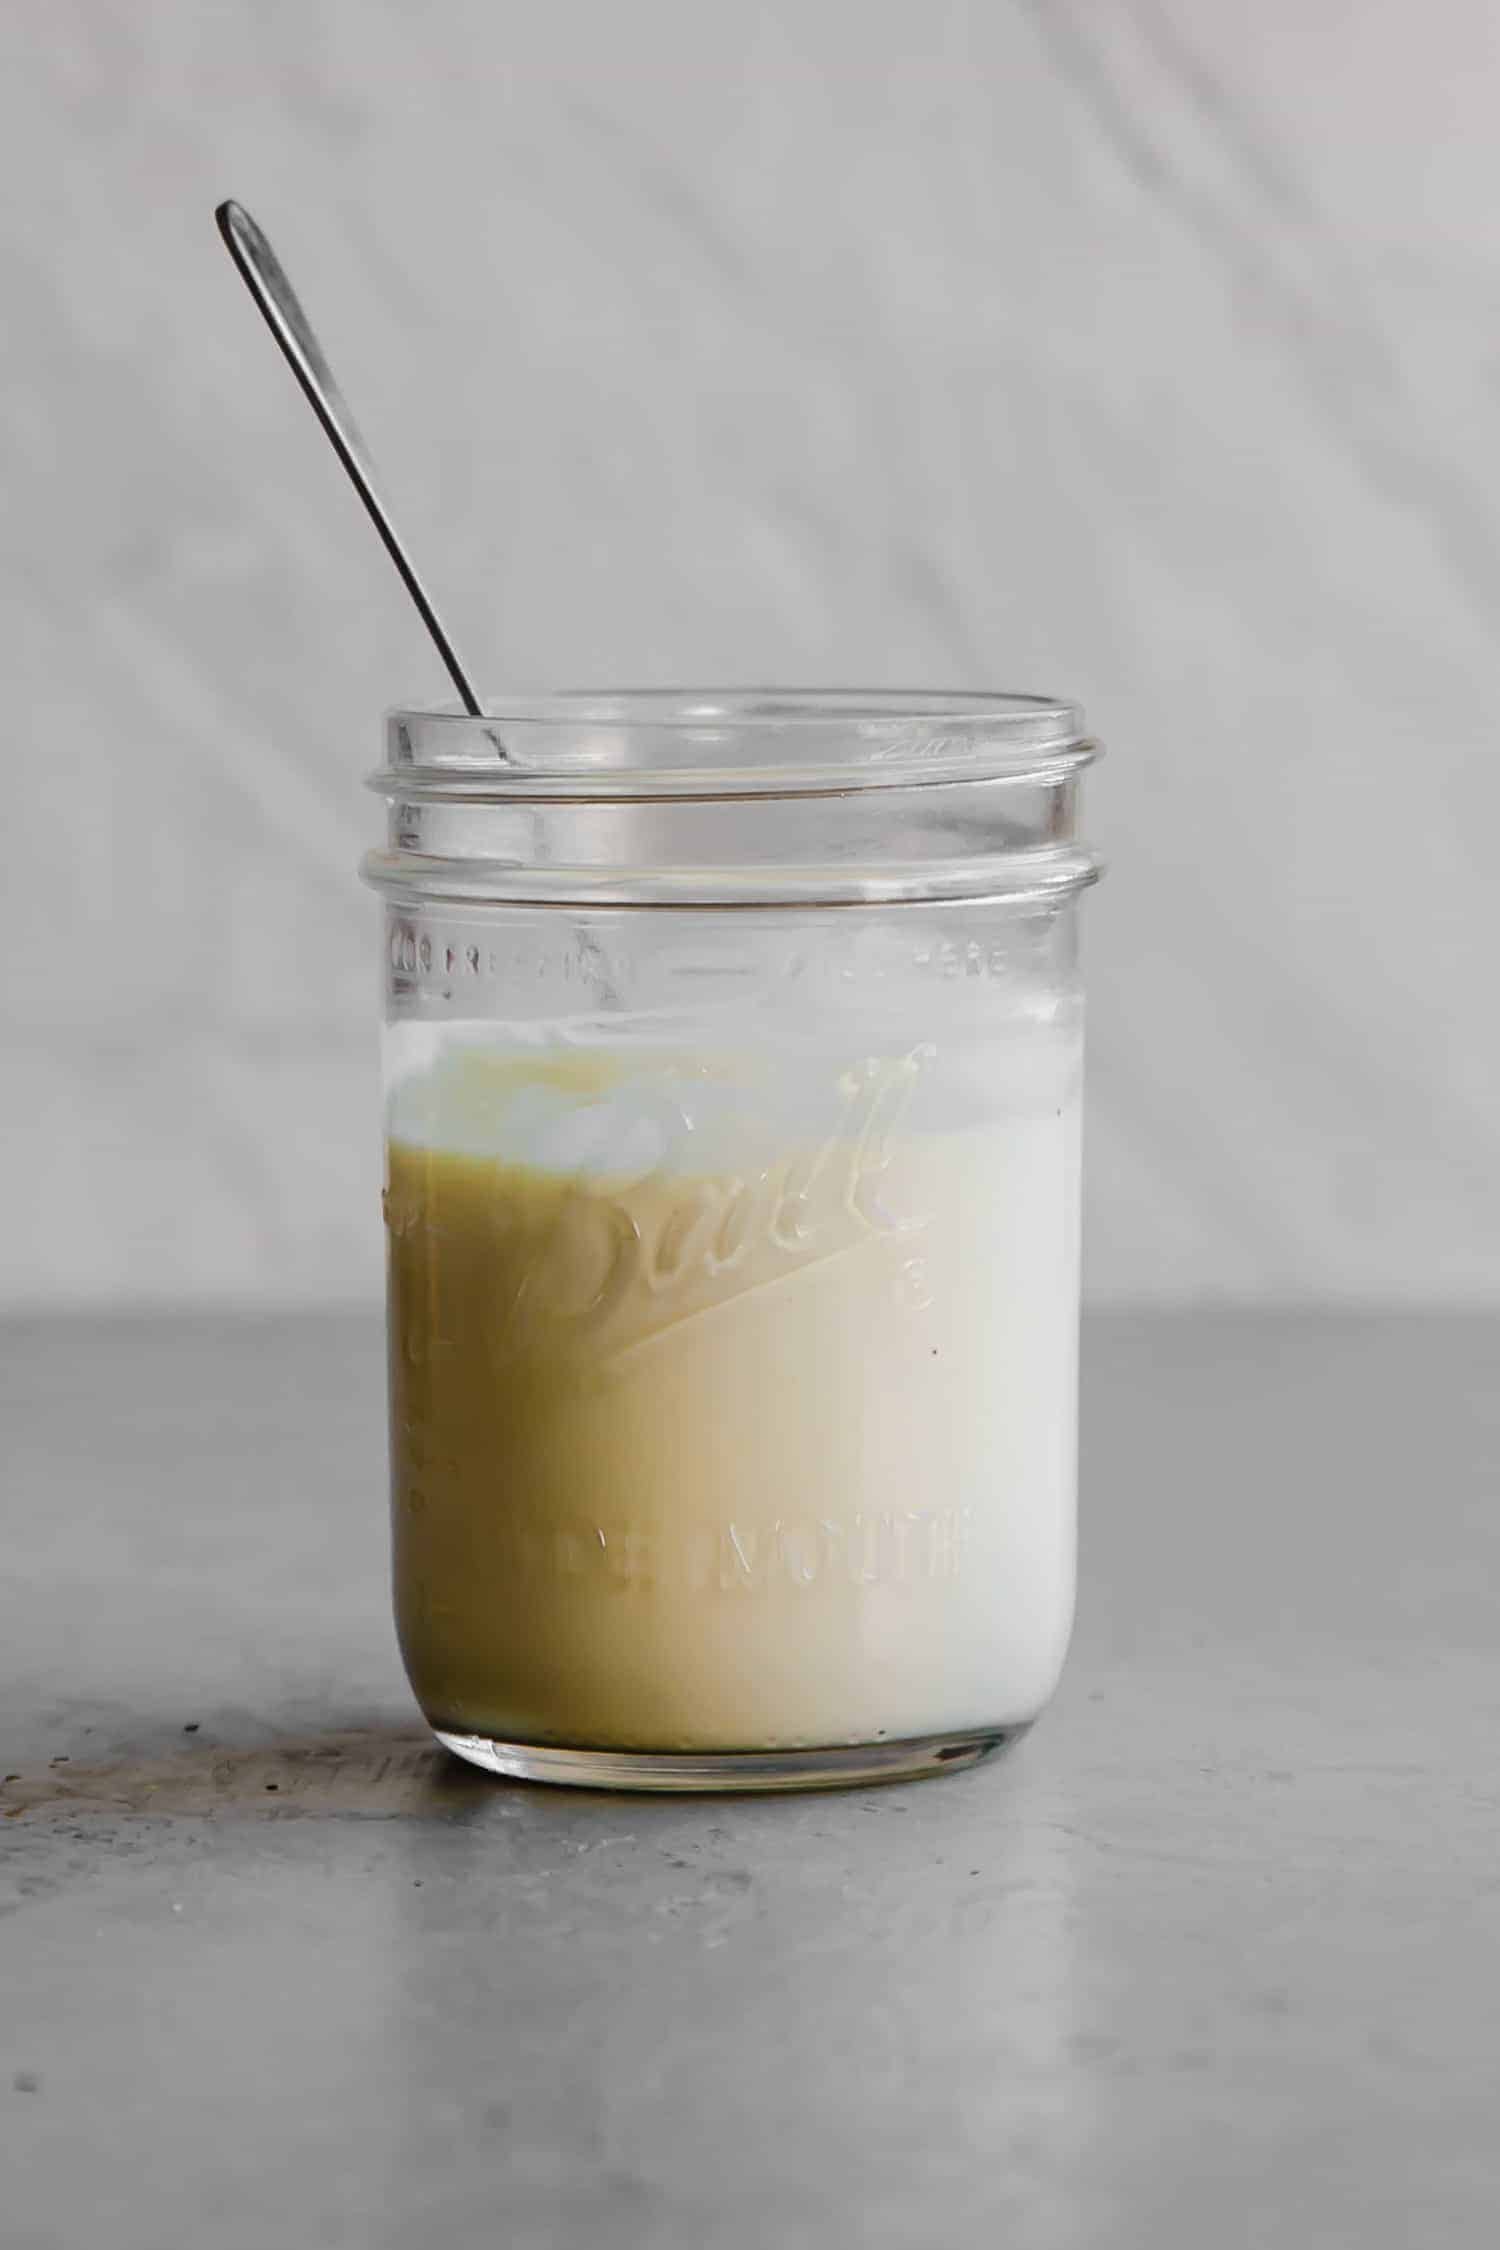 a jar of homemade paleo mayo in a glass jar with a spoon